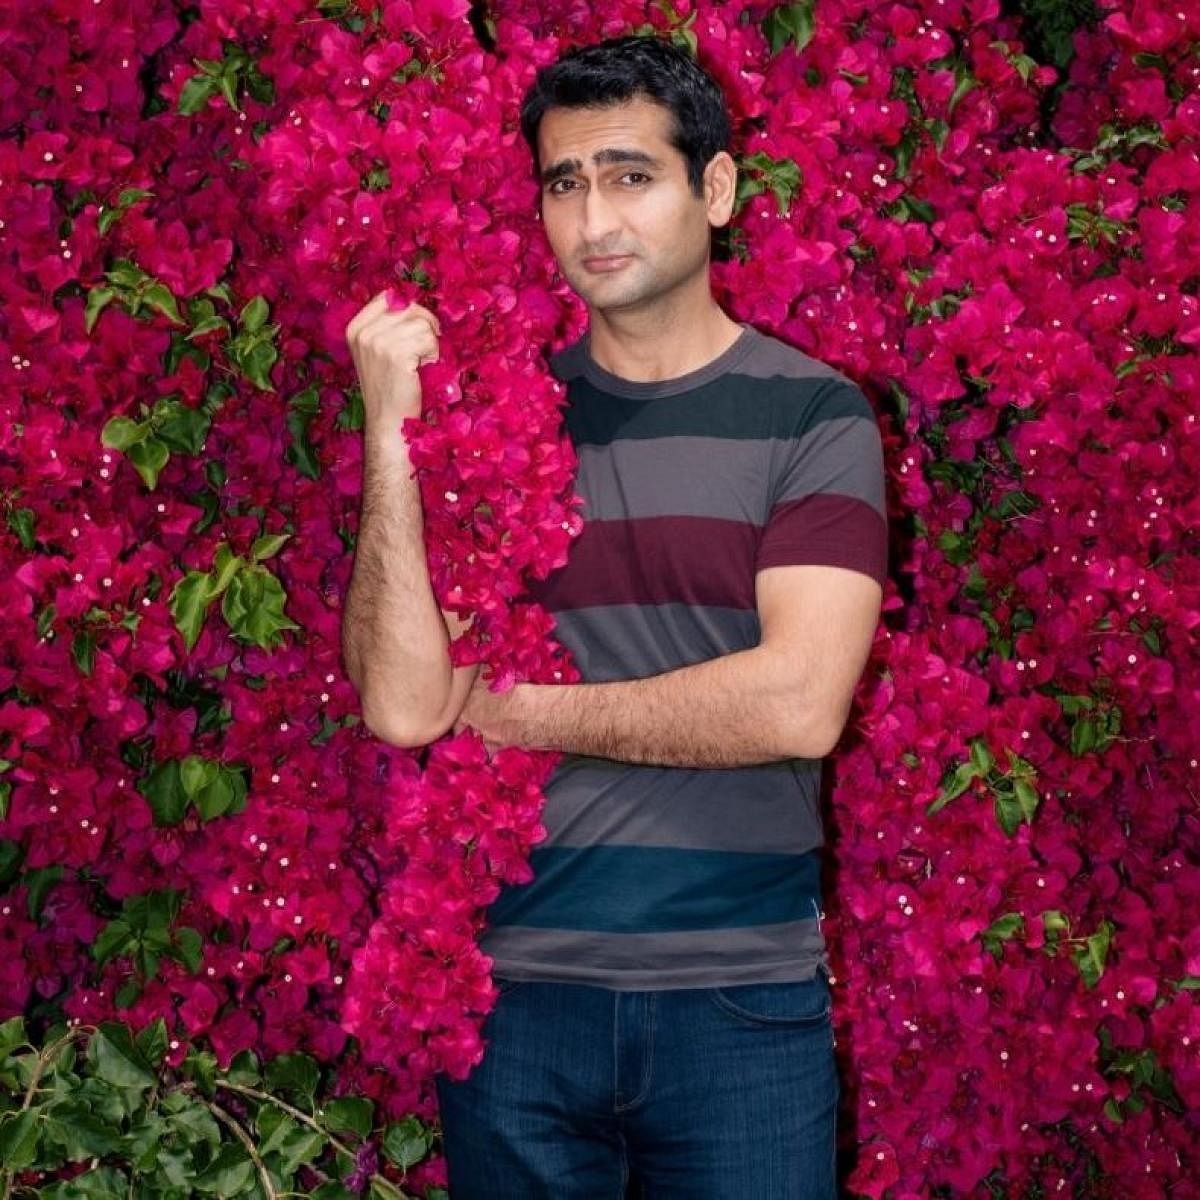 Actor Kumail Nanjiani has joined the cast of political thriller The Independent.(Credit: Facebook/Kumail Nanjiani)